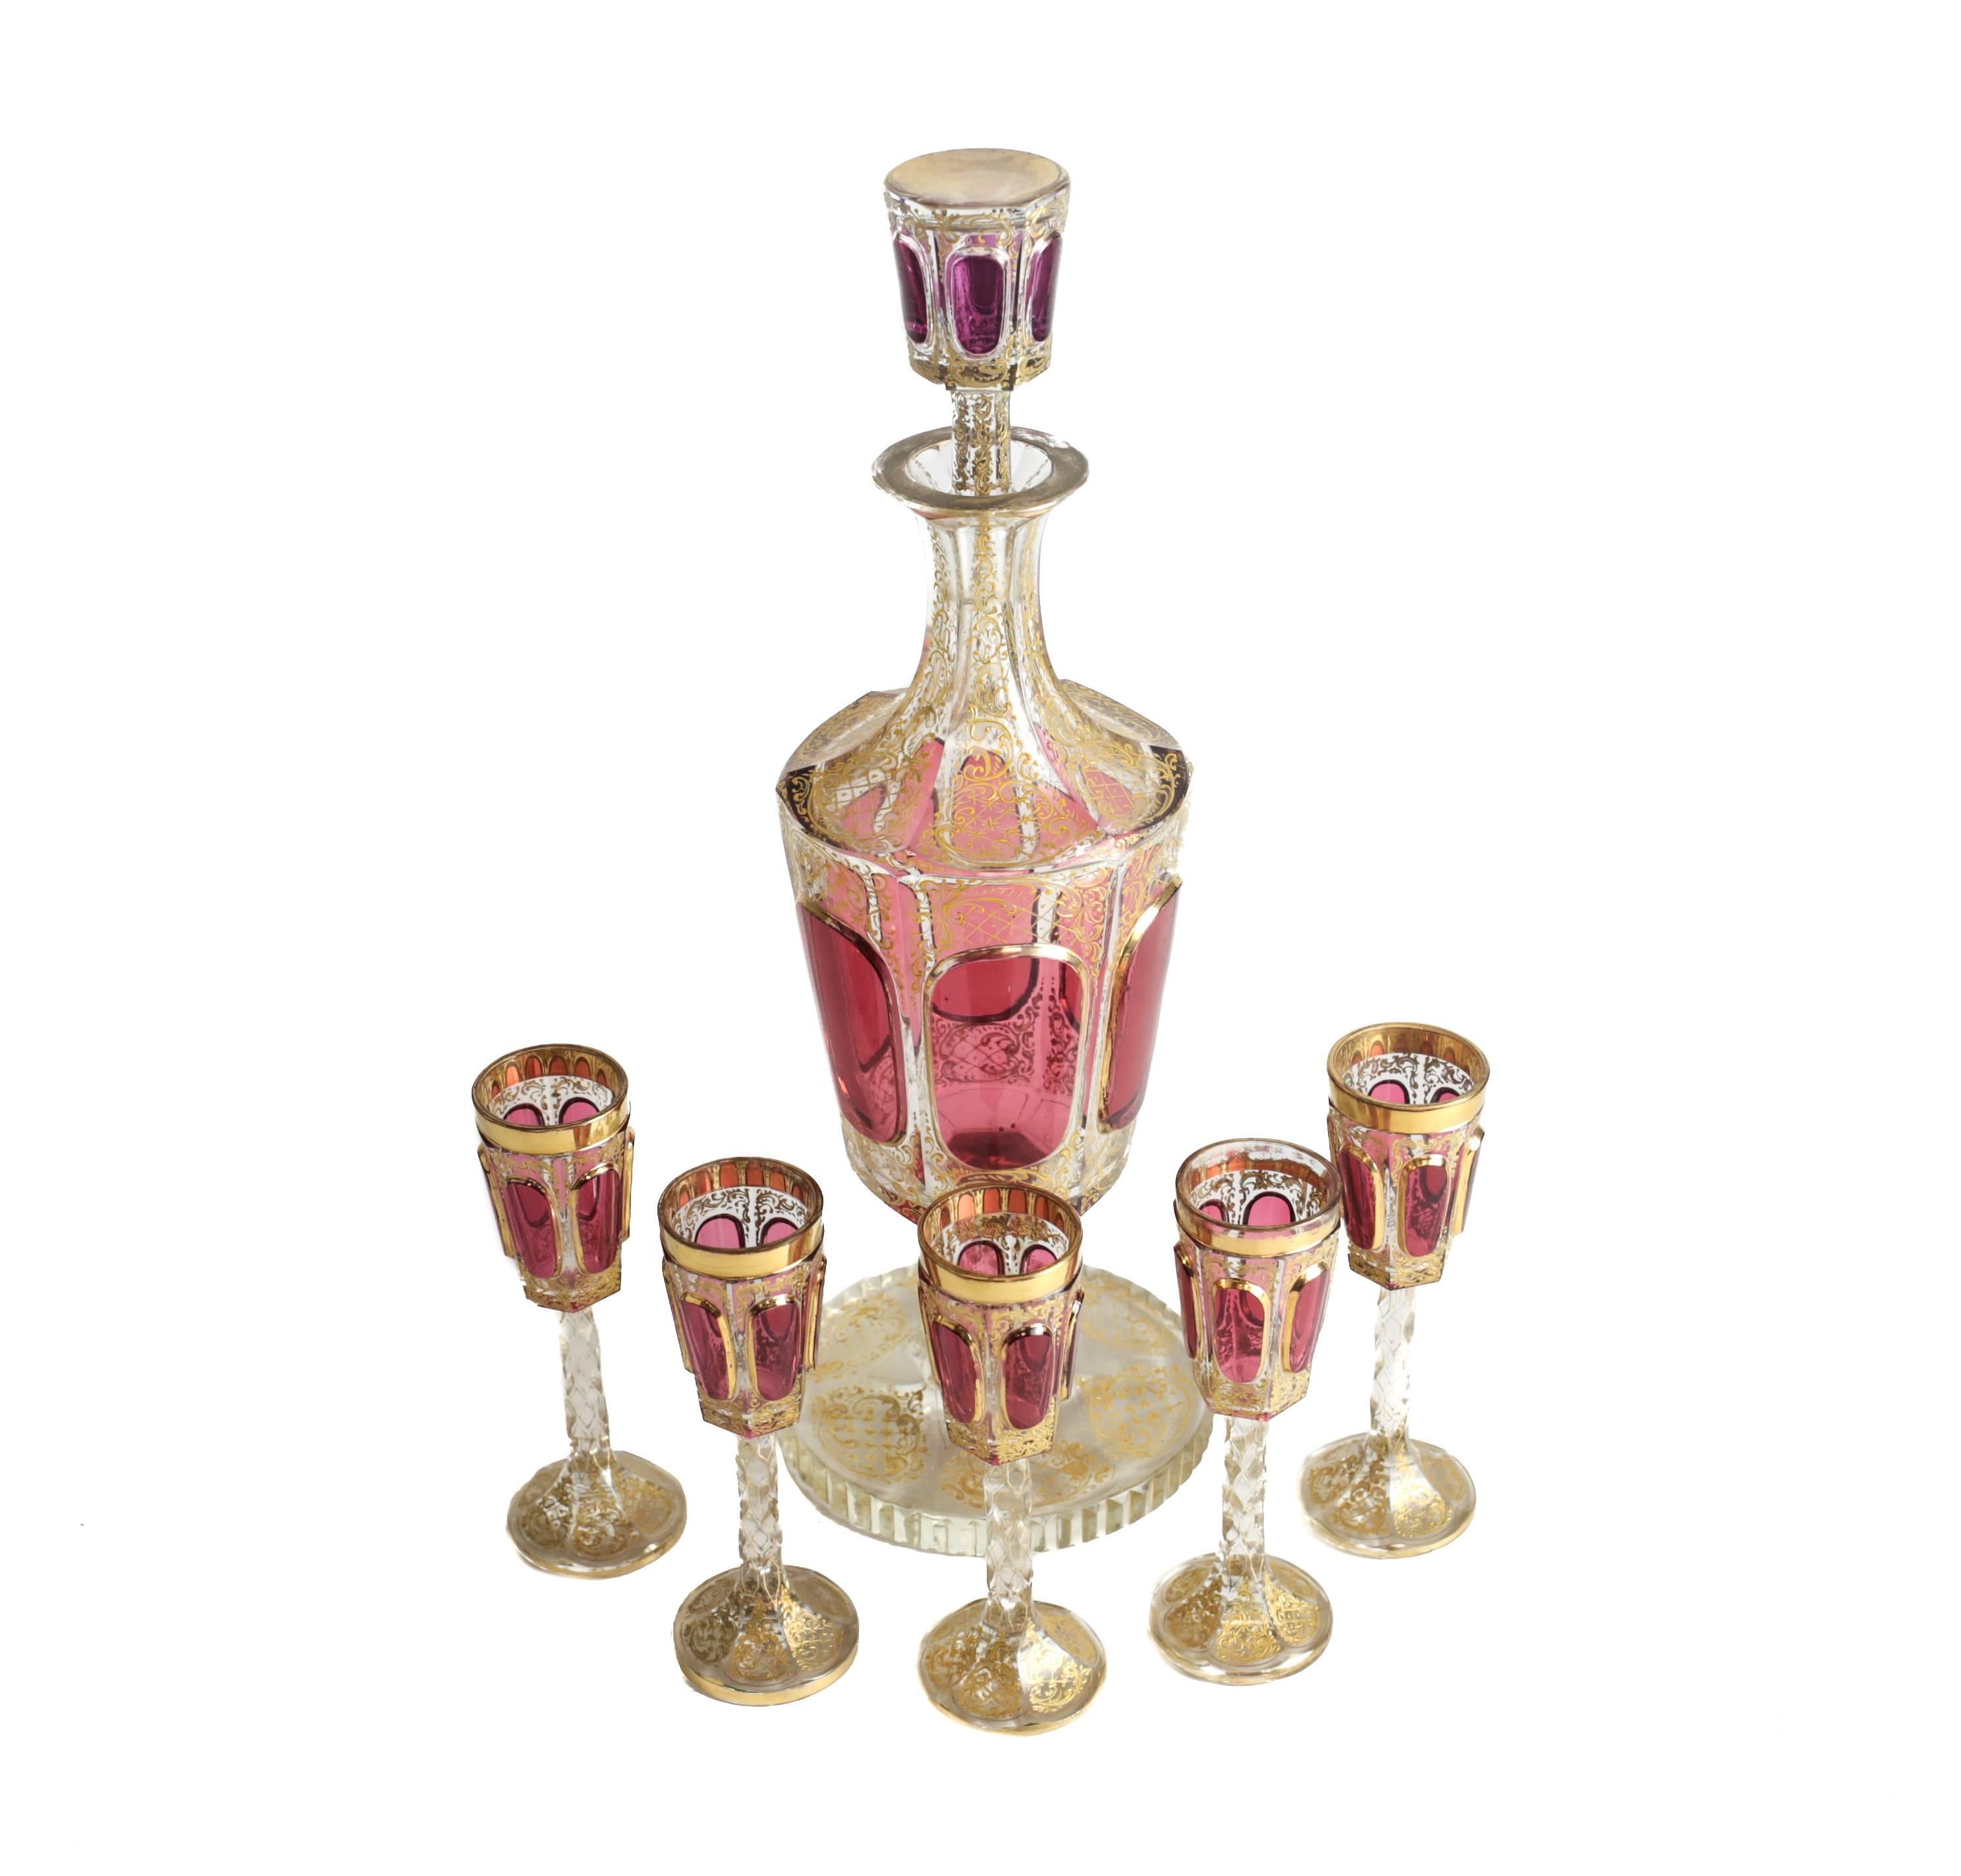 A striking liquor service with glass cut in two layers, cranberry red and clear, each with richly applied thick gilt decorations. The stems of the cordial glasses with angle cut prisms complimenting the stem of the decanter. A fine quality example